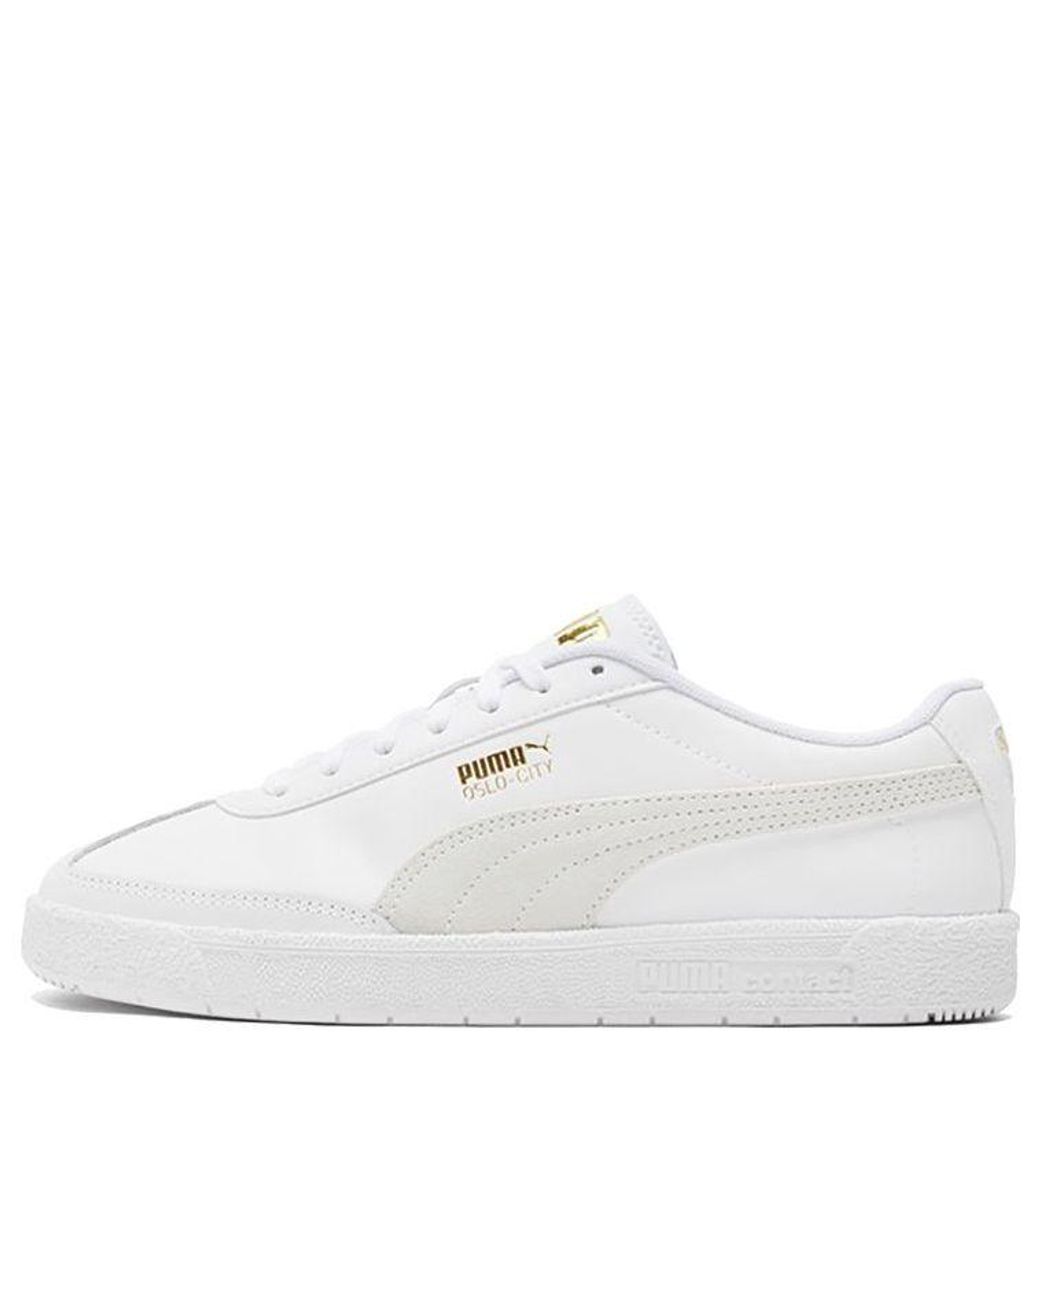 PUMA Oslo-city Casual Shoes White/grey for Men | Lyst